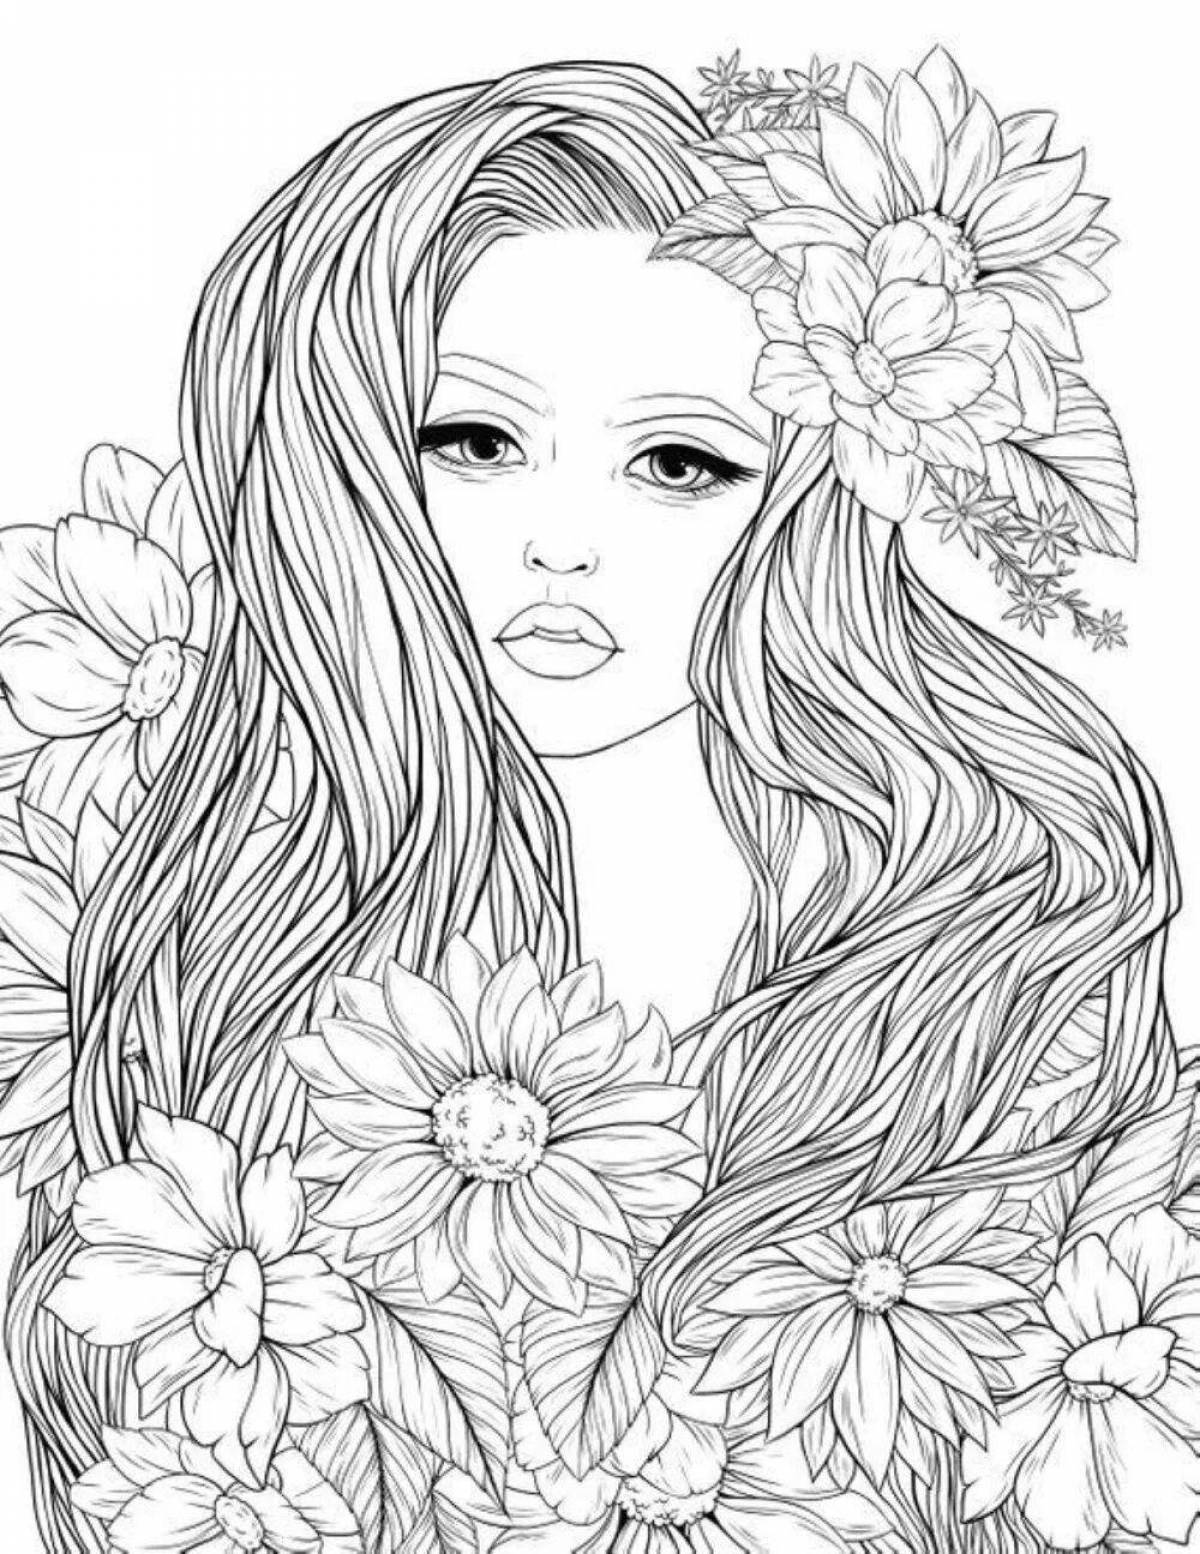 Dazzling coloring page is very beautiful